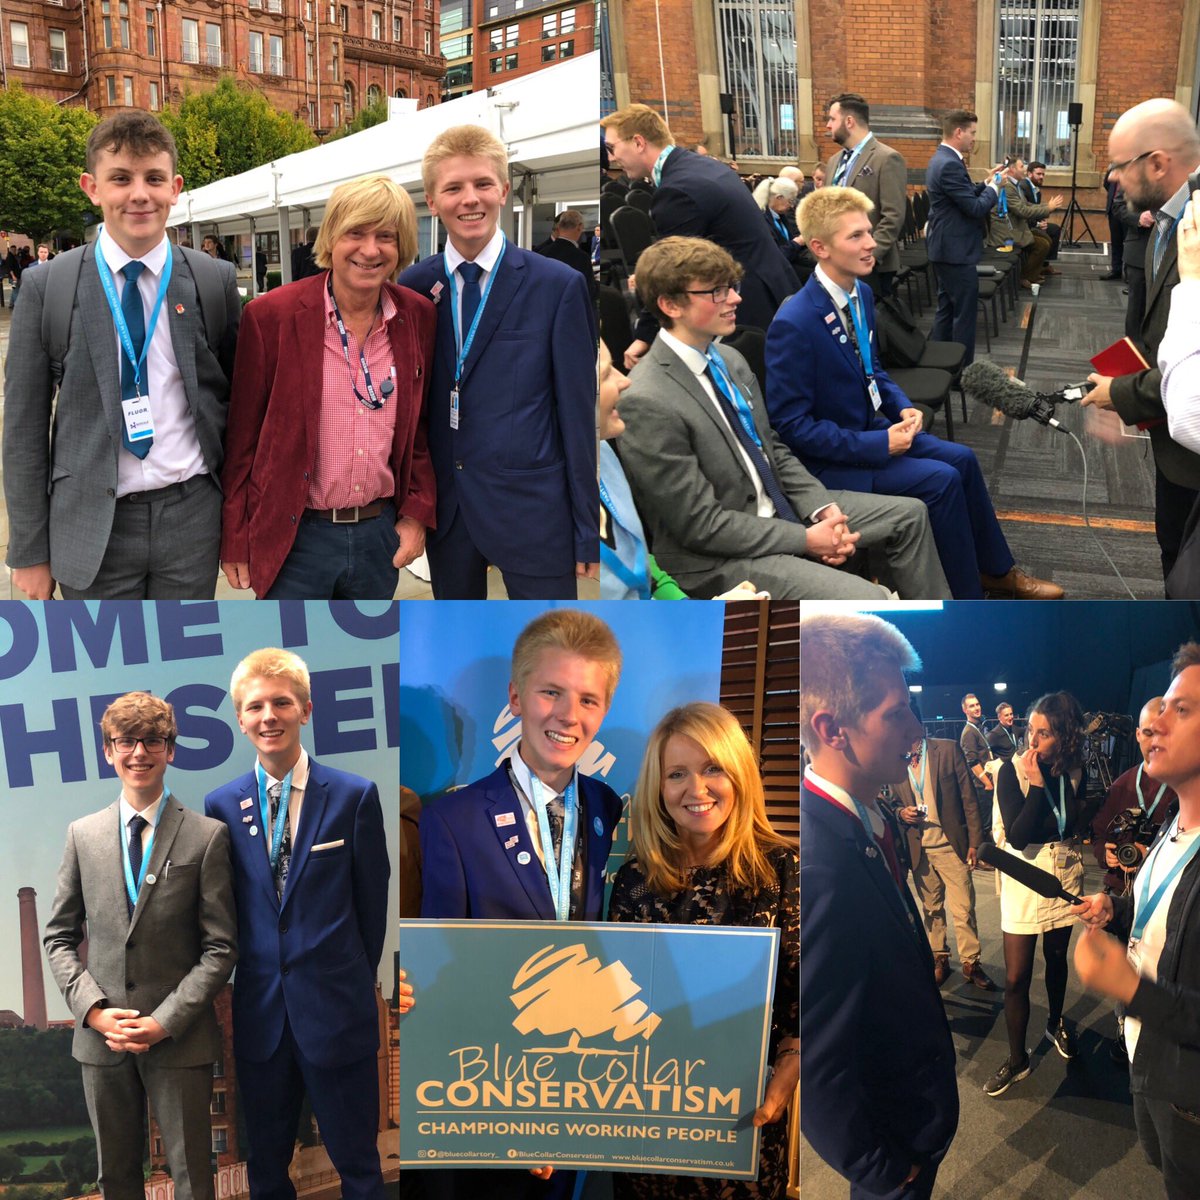 Had an absolute blast at #CPC19 this week. I had the amazing opportunity to catch up and meet some fantastic @Conservatives from across the UK as well as attending and speaking at some amazing events! Bring on next year!! 🎉🎉 @WelshConserv @ValeOfClwydCons @ValeOfClwydYC